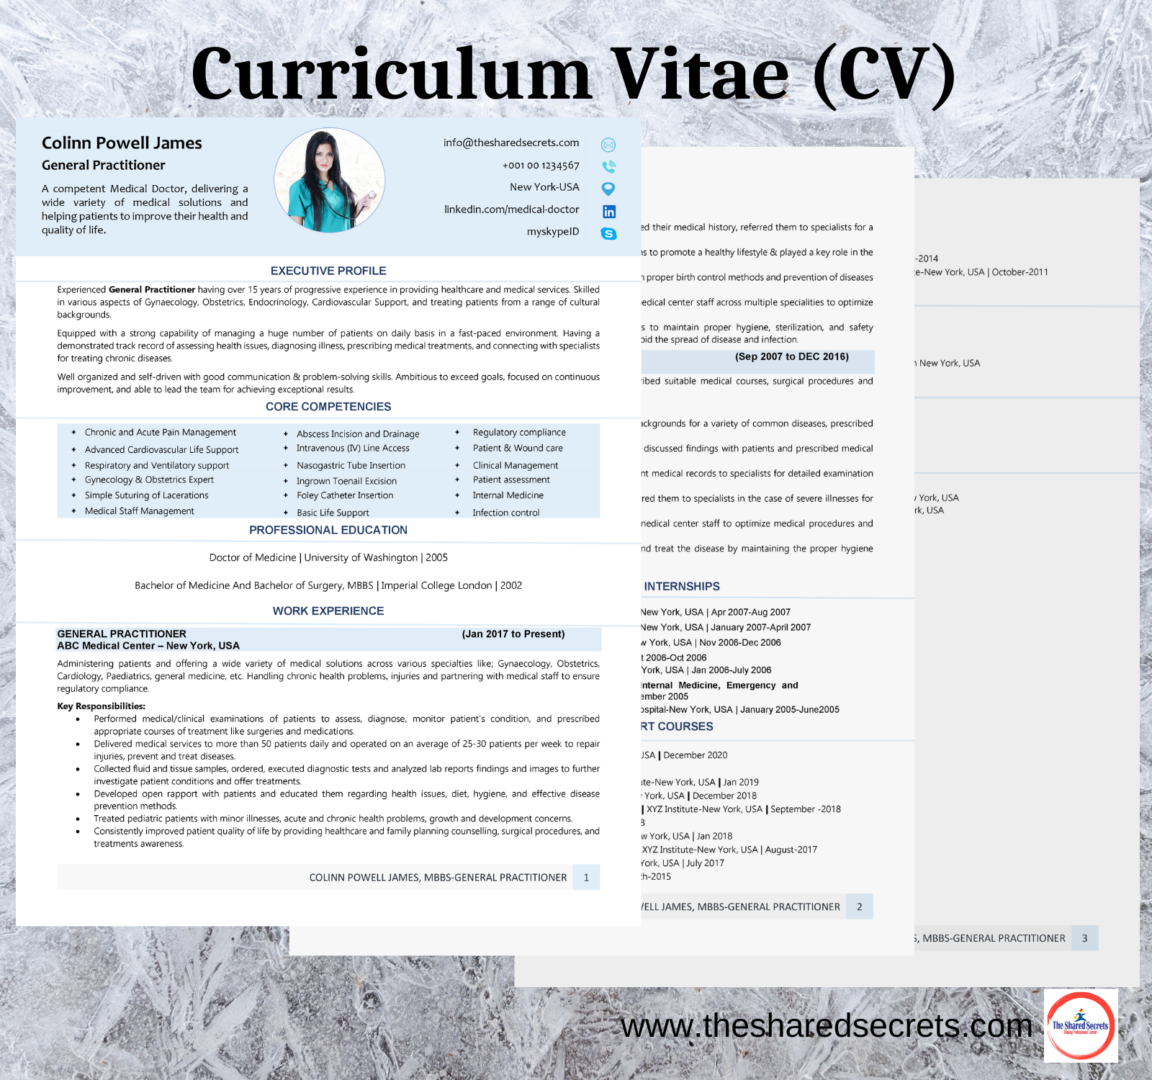 Difference between a CV and a resume